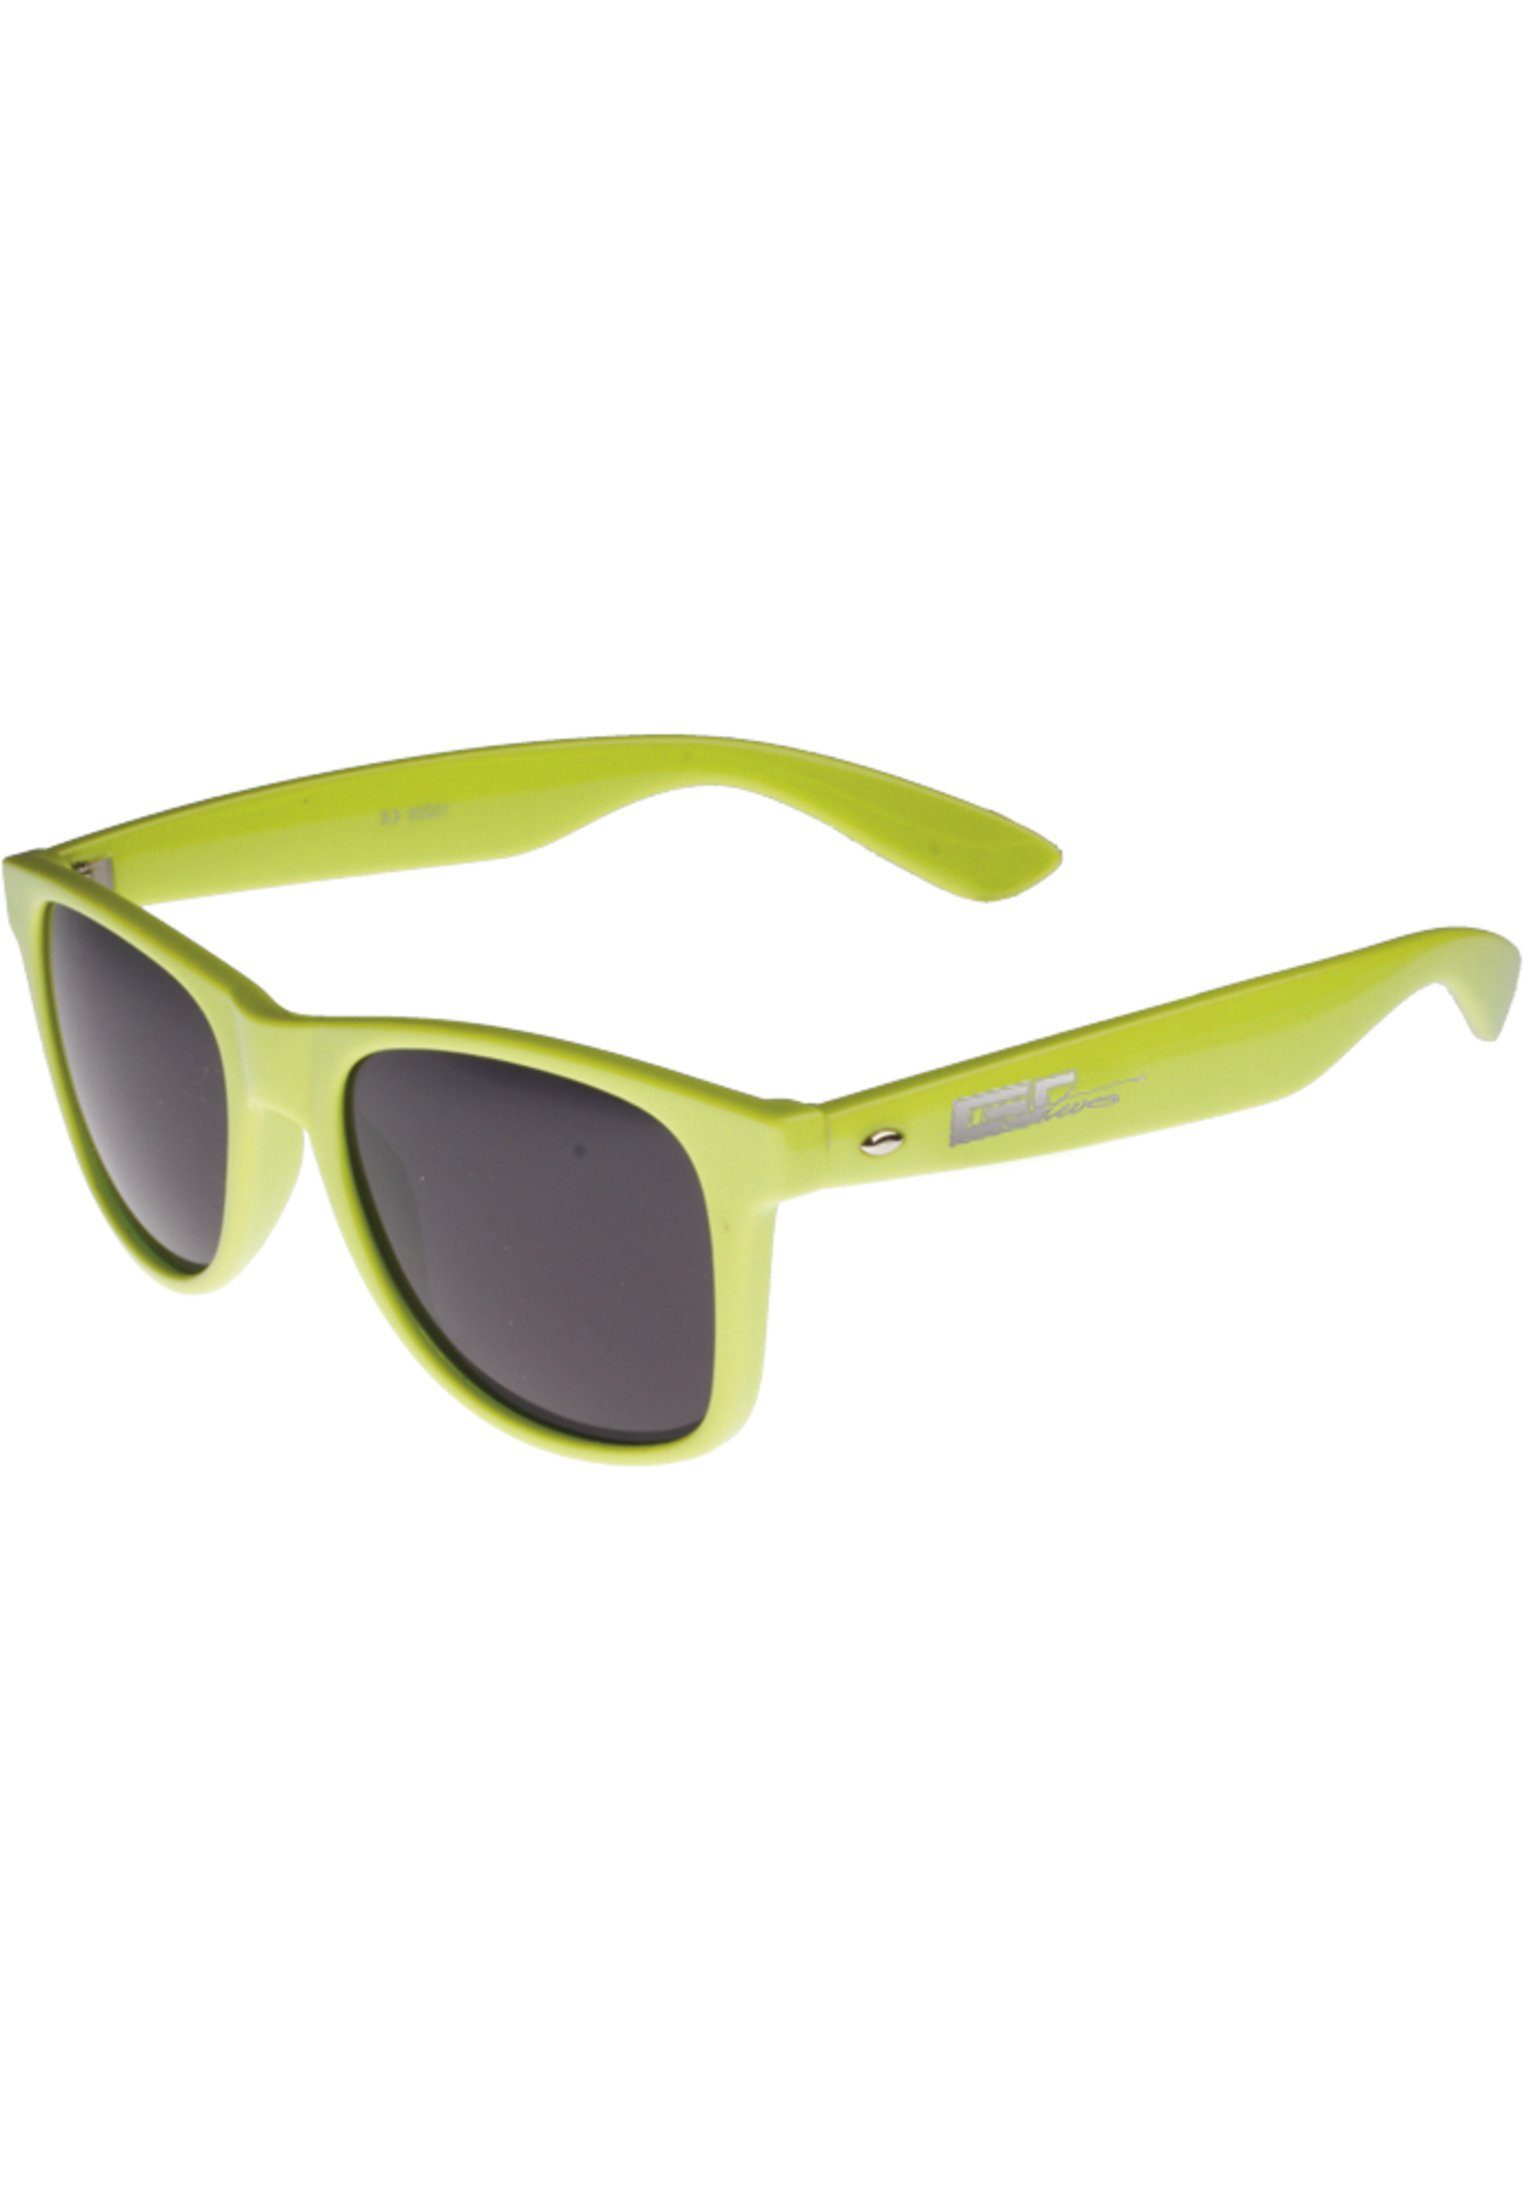 MSTRDS Sonnenbrille Accessoires Shades neongreen GStwo Groove